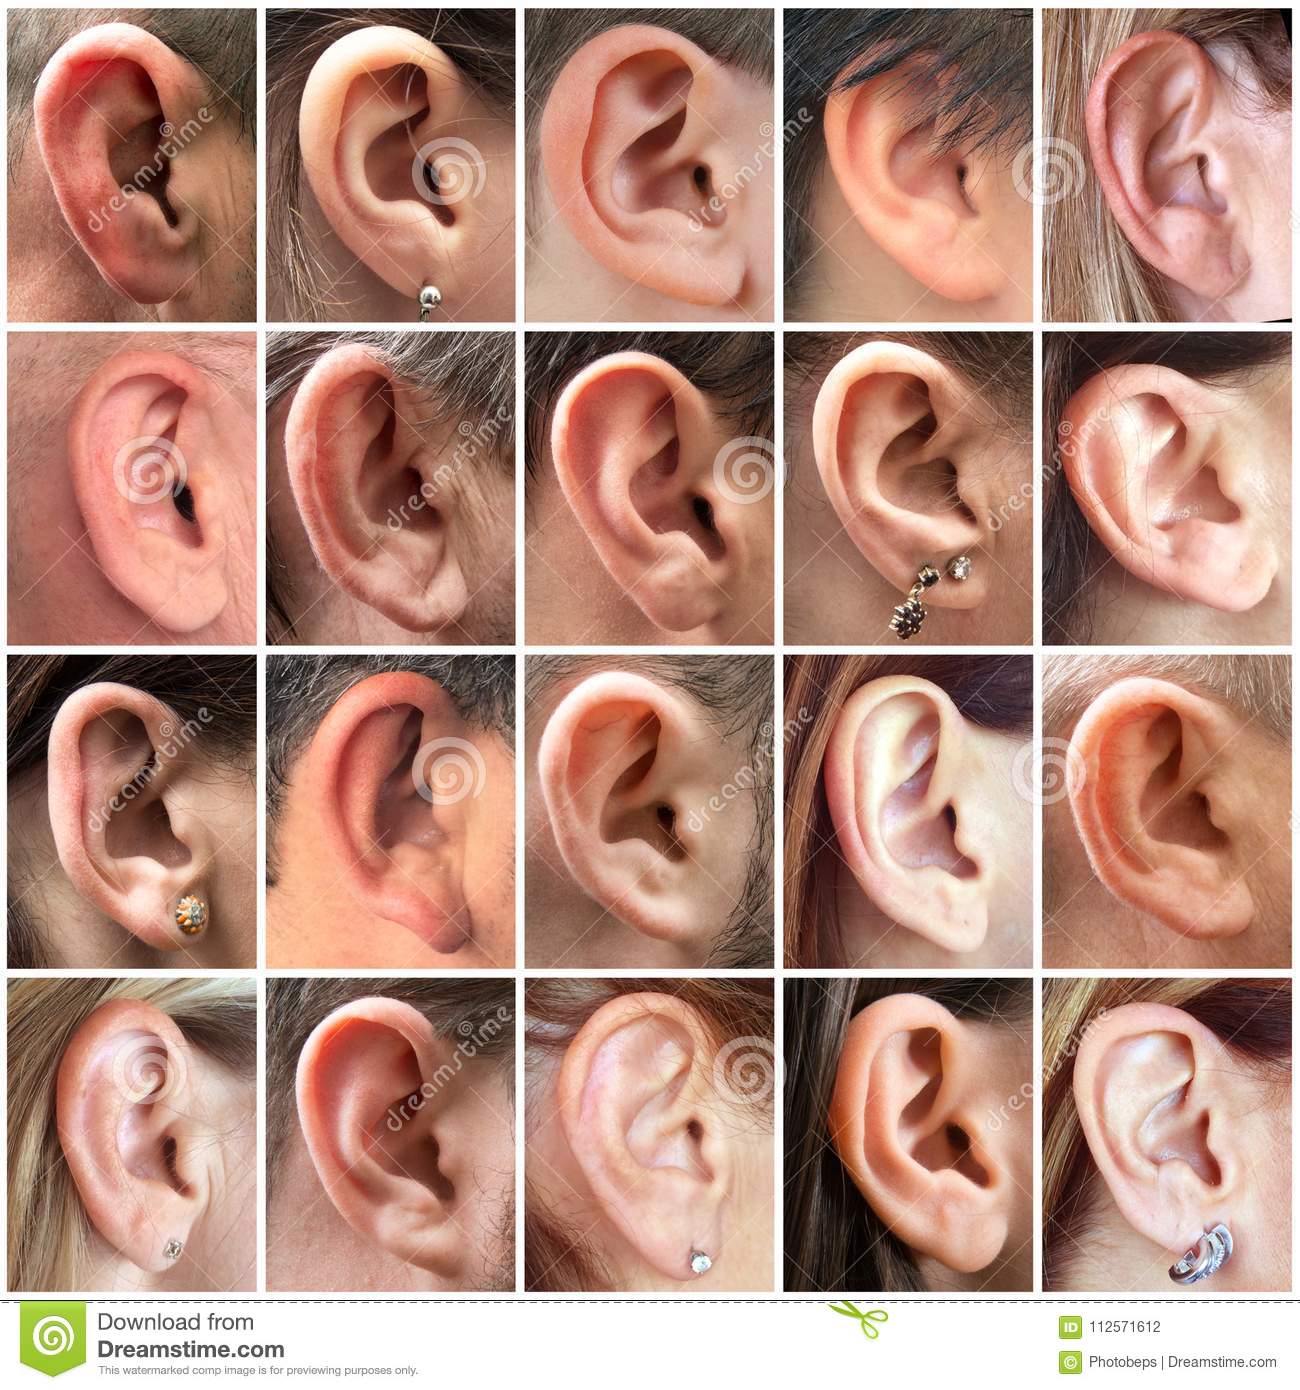 collection-images-human-ears-images-human-ears-collage-112571612.jpg